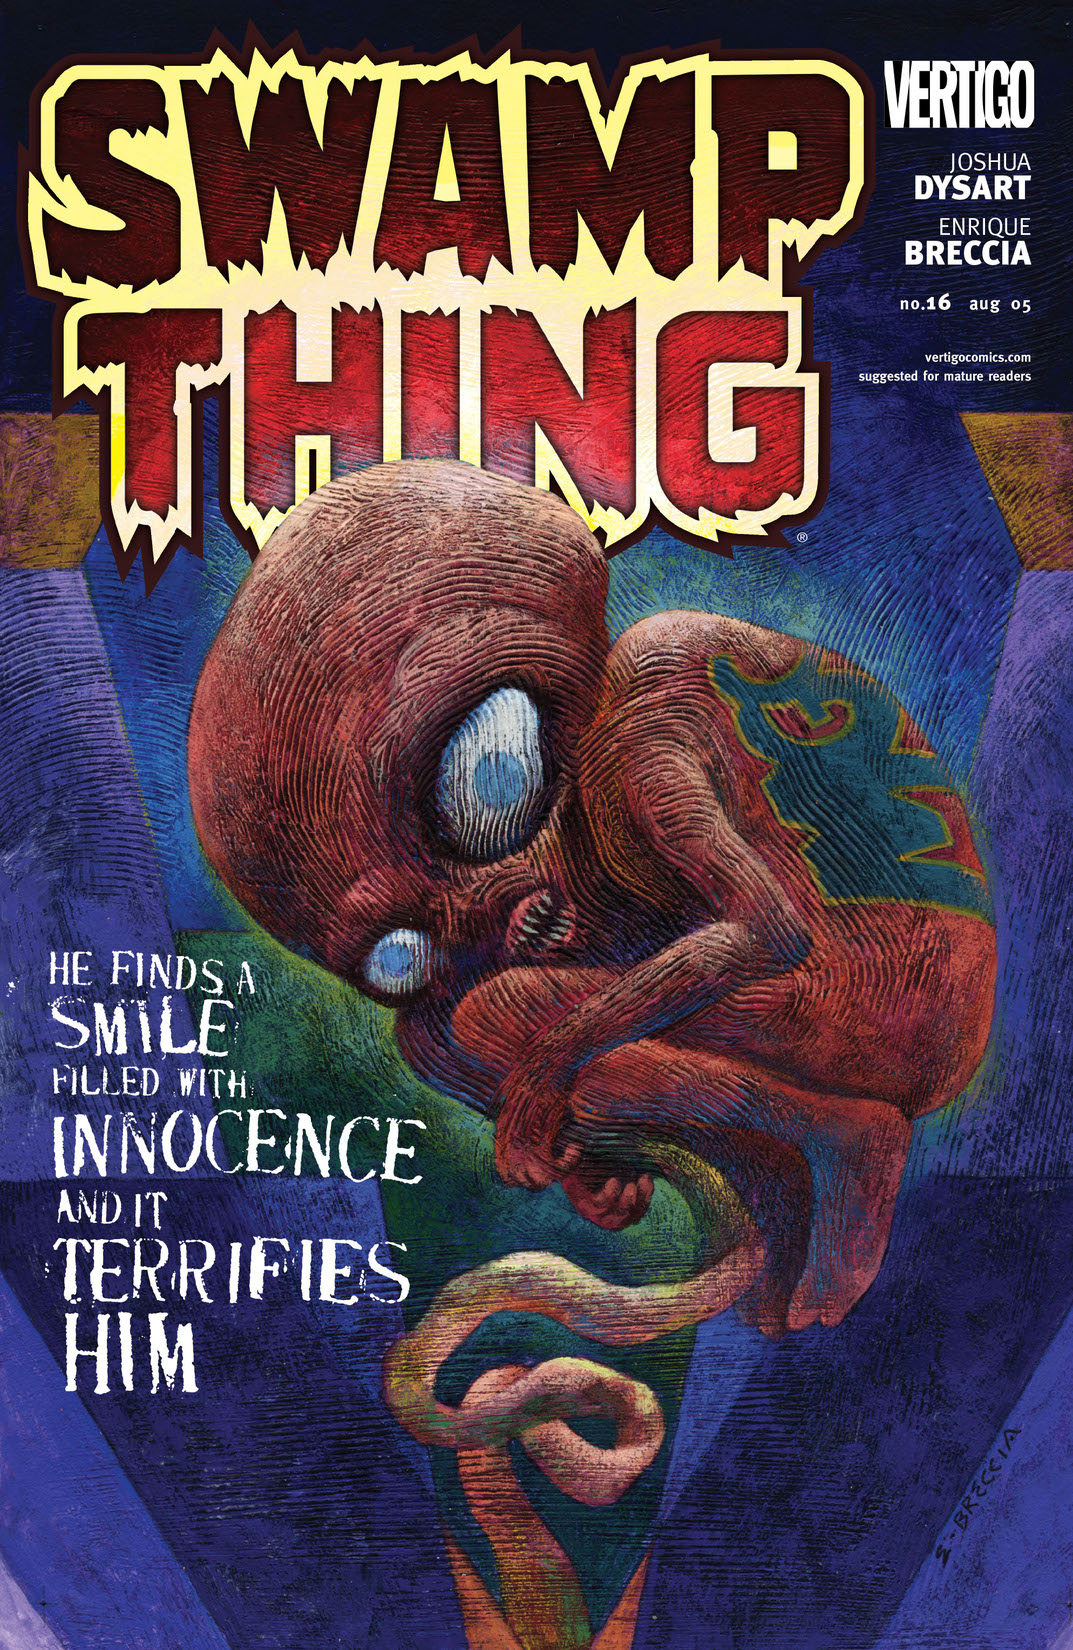 Swamp Thing (2004-) #16 preview images